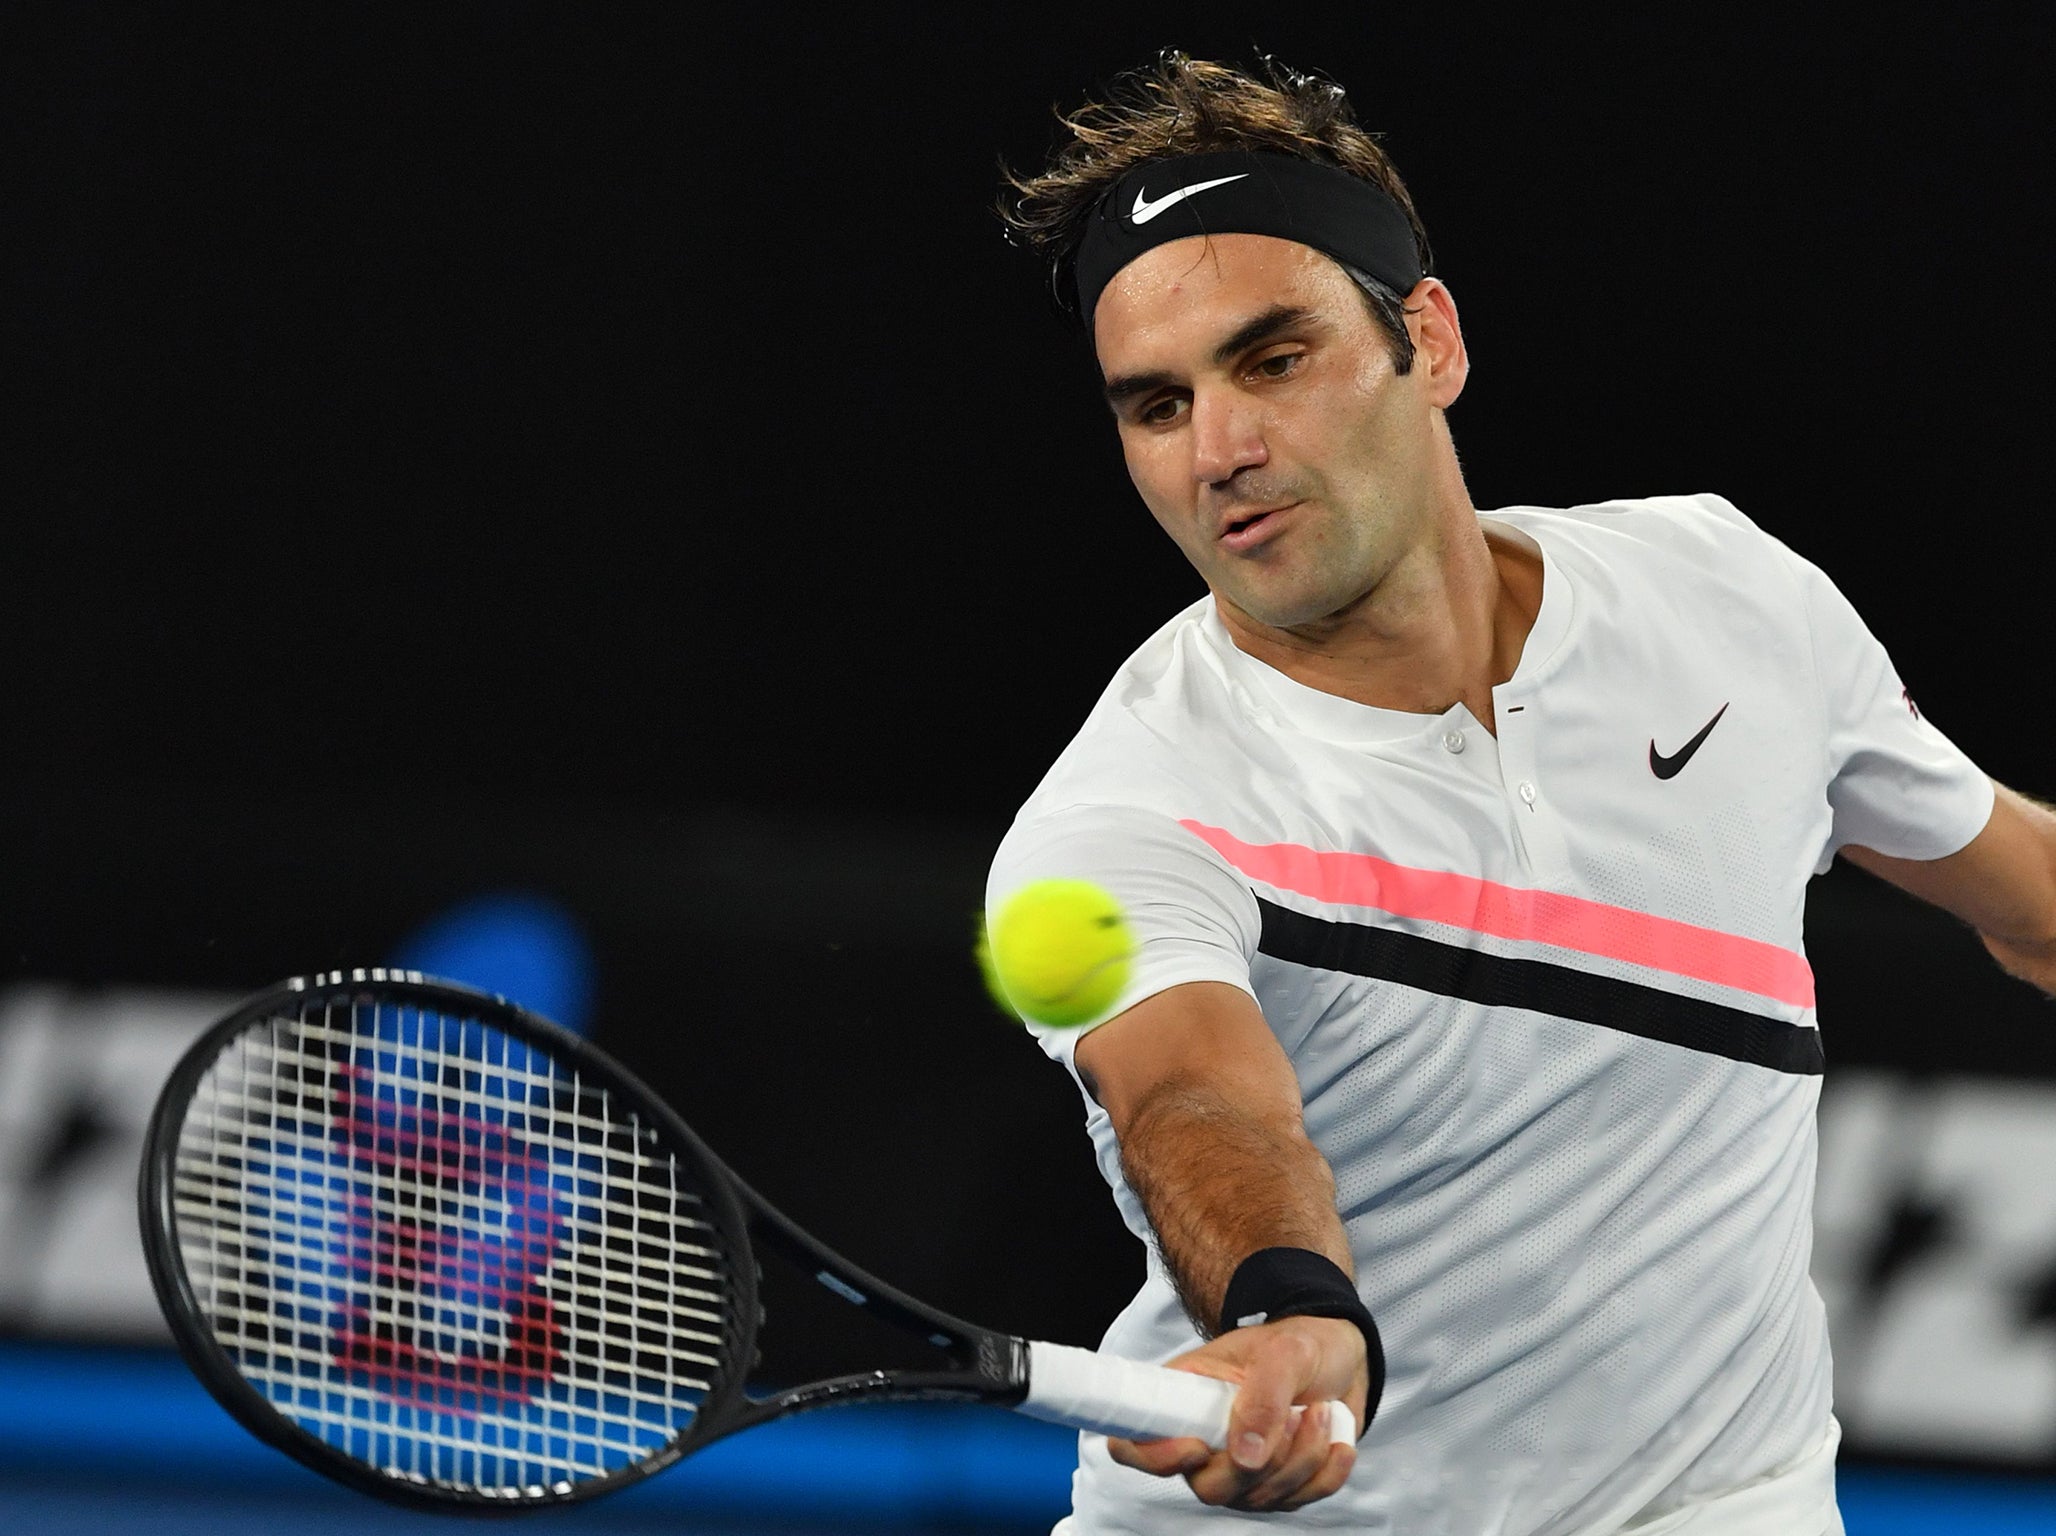 Roger Federer is safely through to the next round